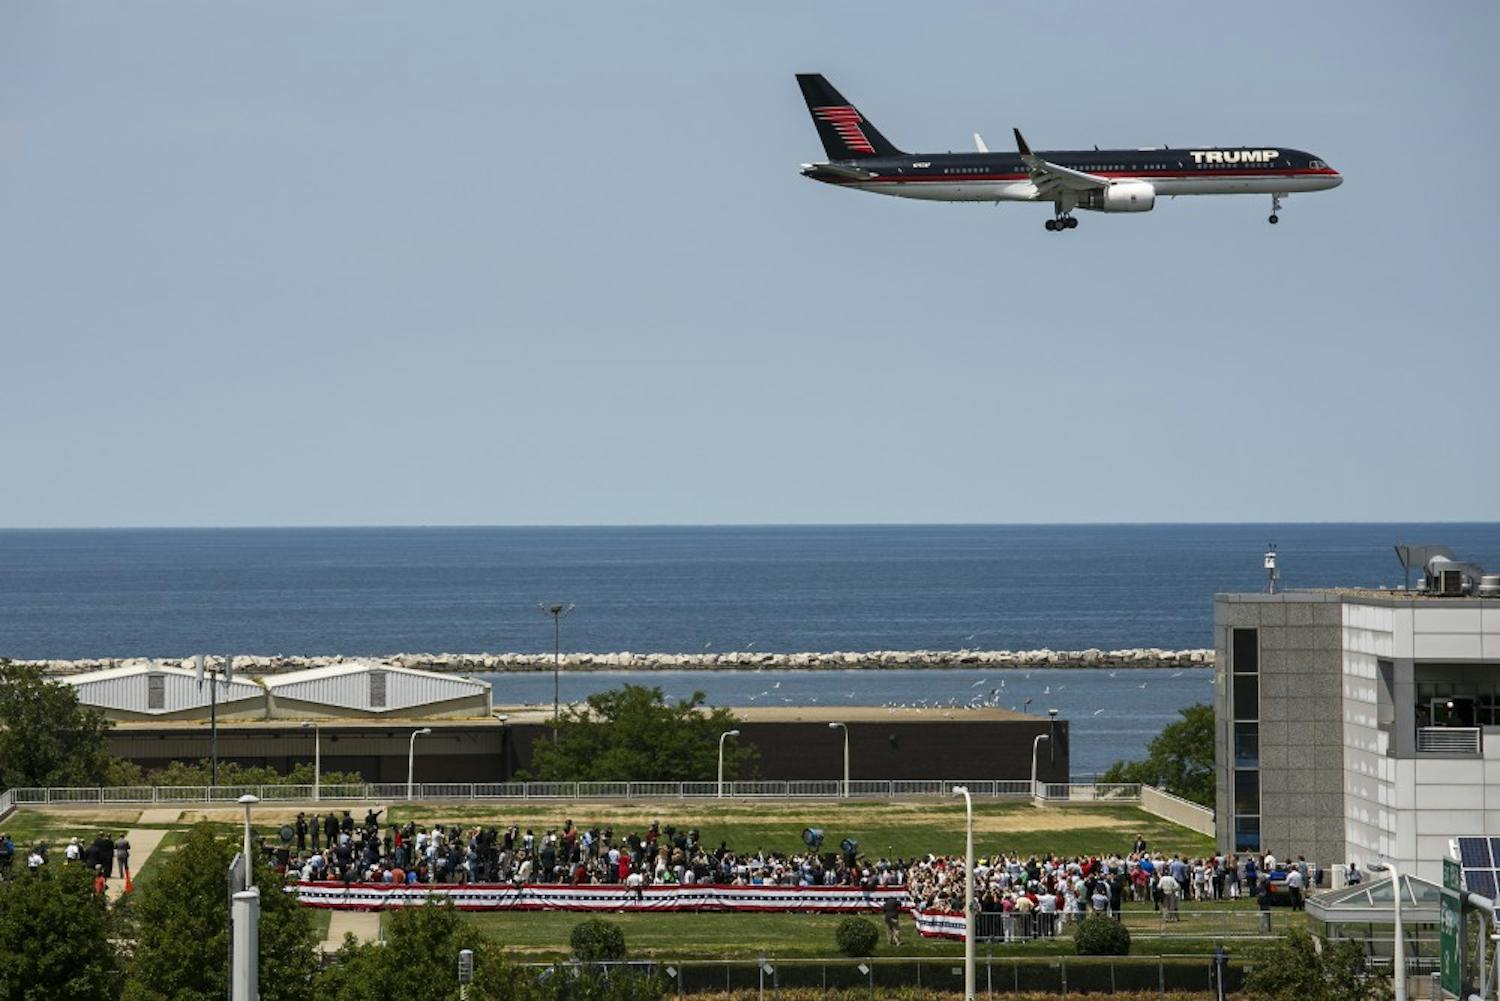 Donald Trump arrives in his airplane as he flies over a campaign rally at the Great Lakes Science Center during the Republican National Convention in Cleveland on Wednesday, July 20, 2016. (Marcus Yam/Los Angeles Times/TNS)